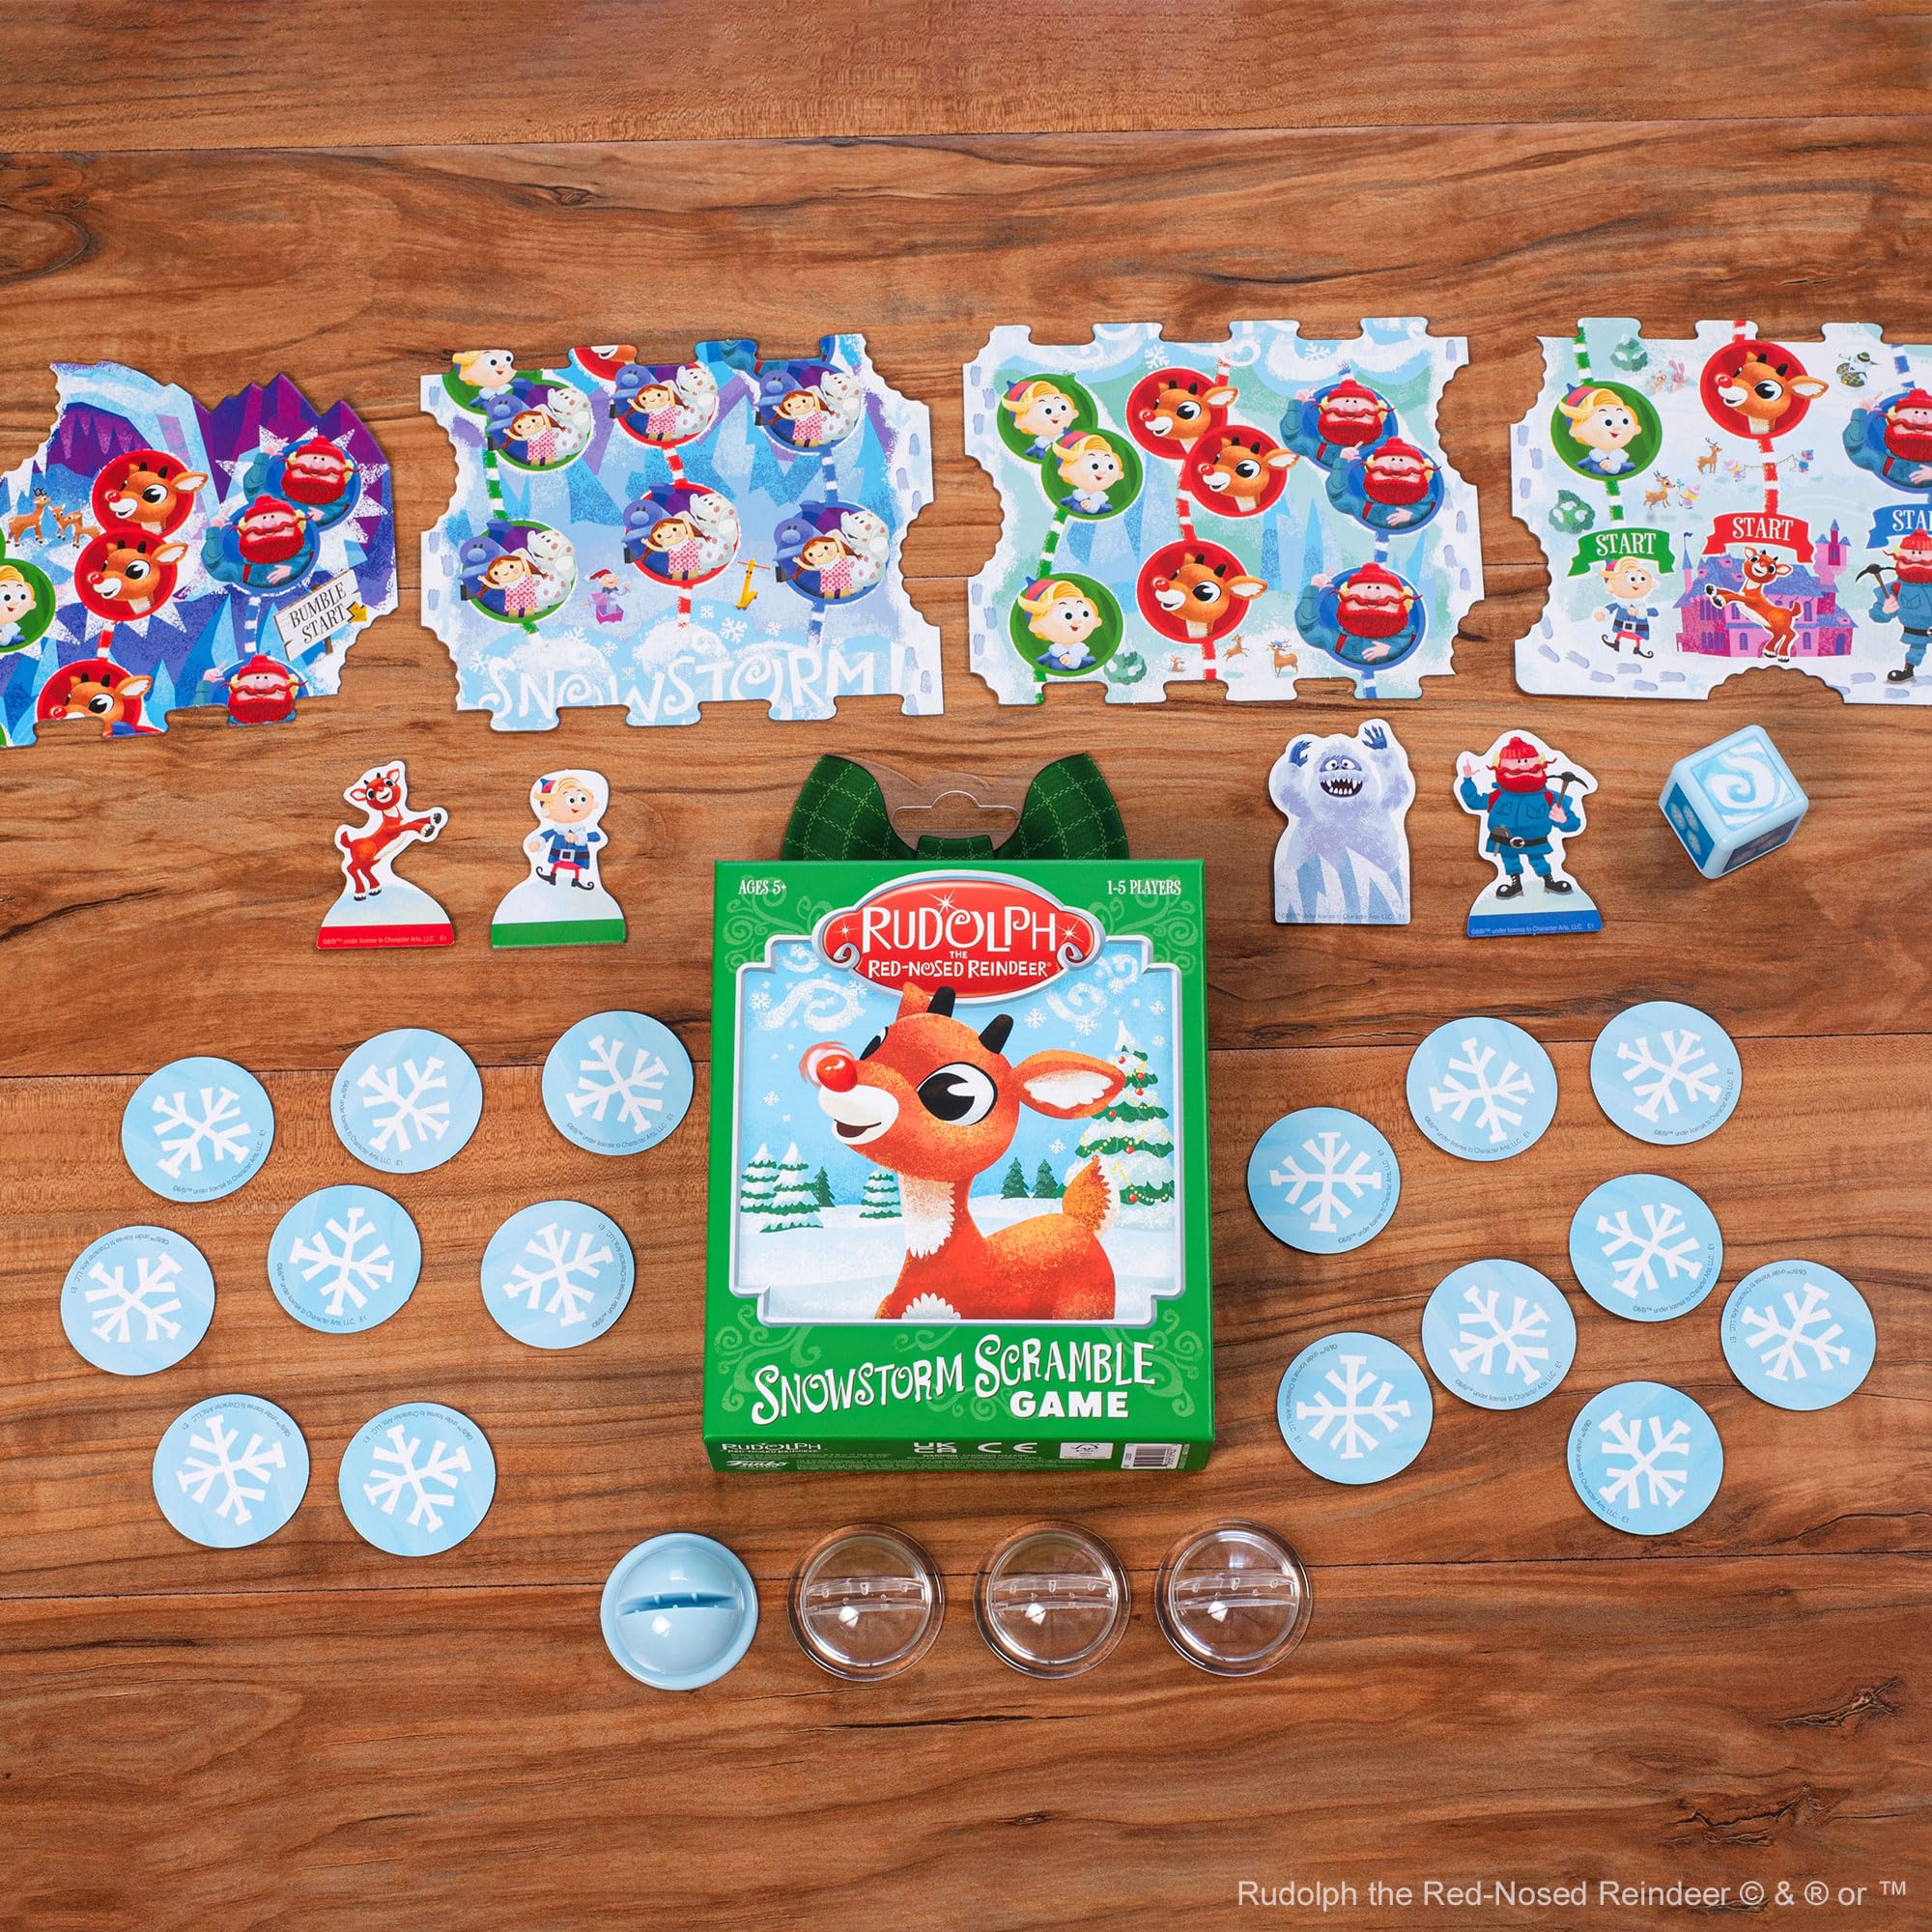 Funko Rudolph The Red-Nosed Reindeer Snowstorm Scramble Game for 1-5 Players Ages 5 and Up